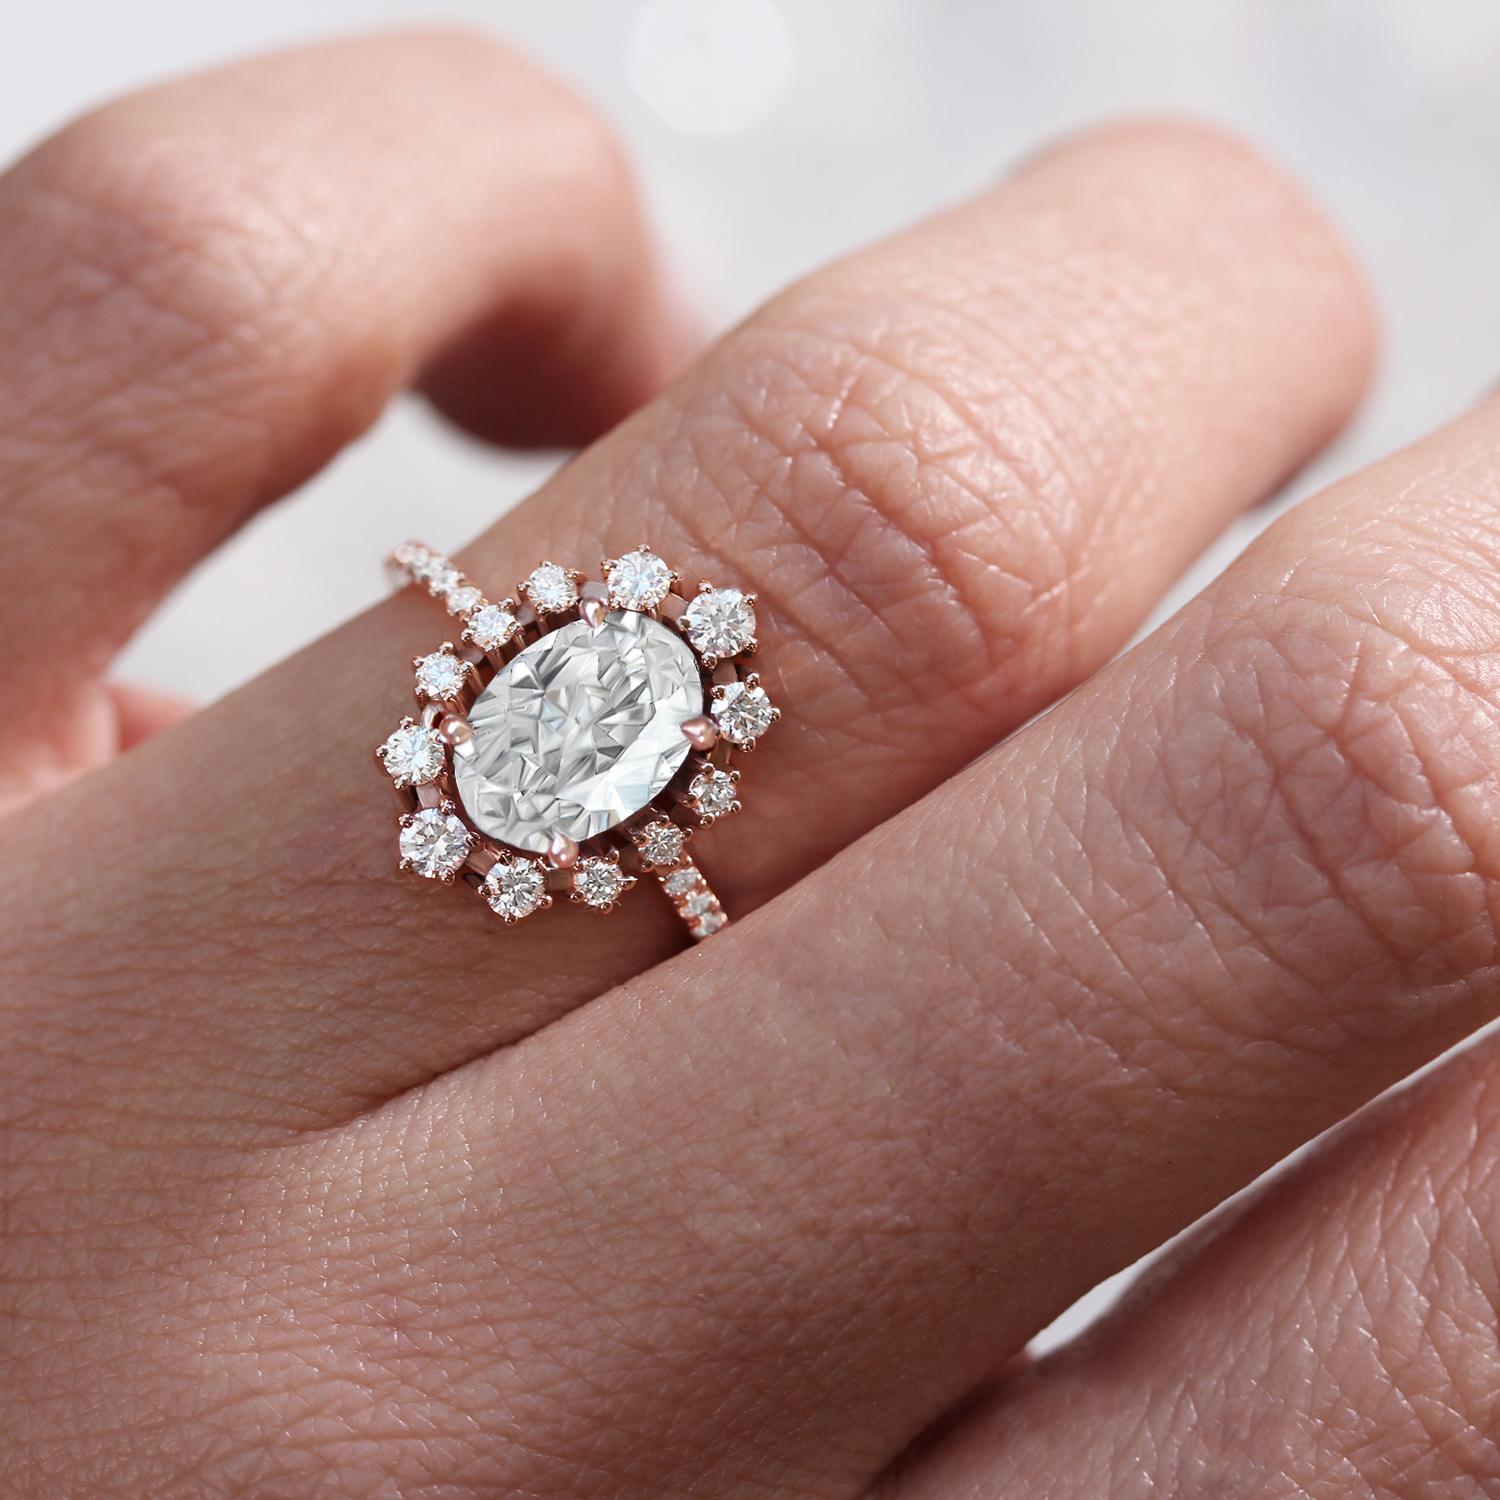 Classic and elegant. Unique oval Moissanite engagement three ring set - Glory.
This list is for the three ring set.
Handmade with care. 
An original design by Silly Shiny Diamonds. 

Details:
* Center stone shape: Oval.
* Center stone type: